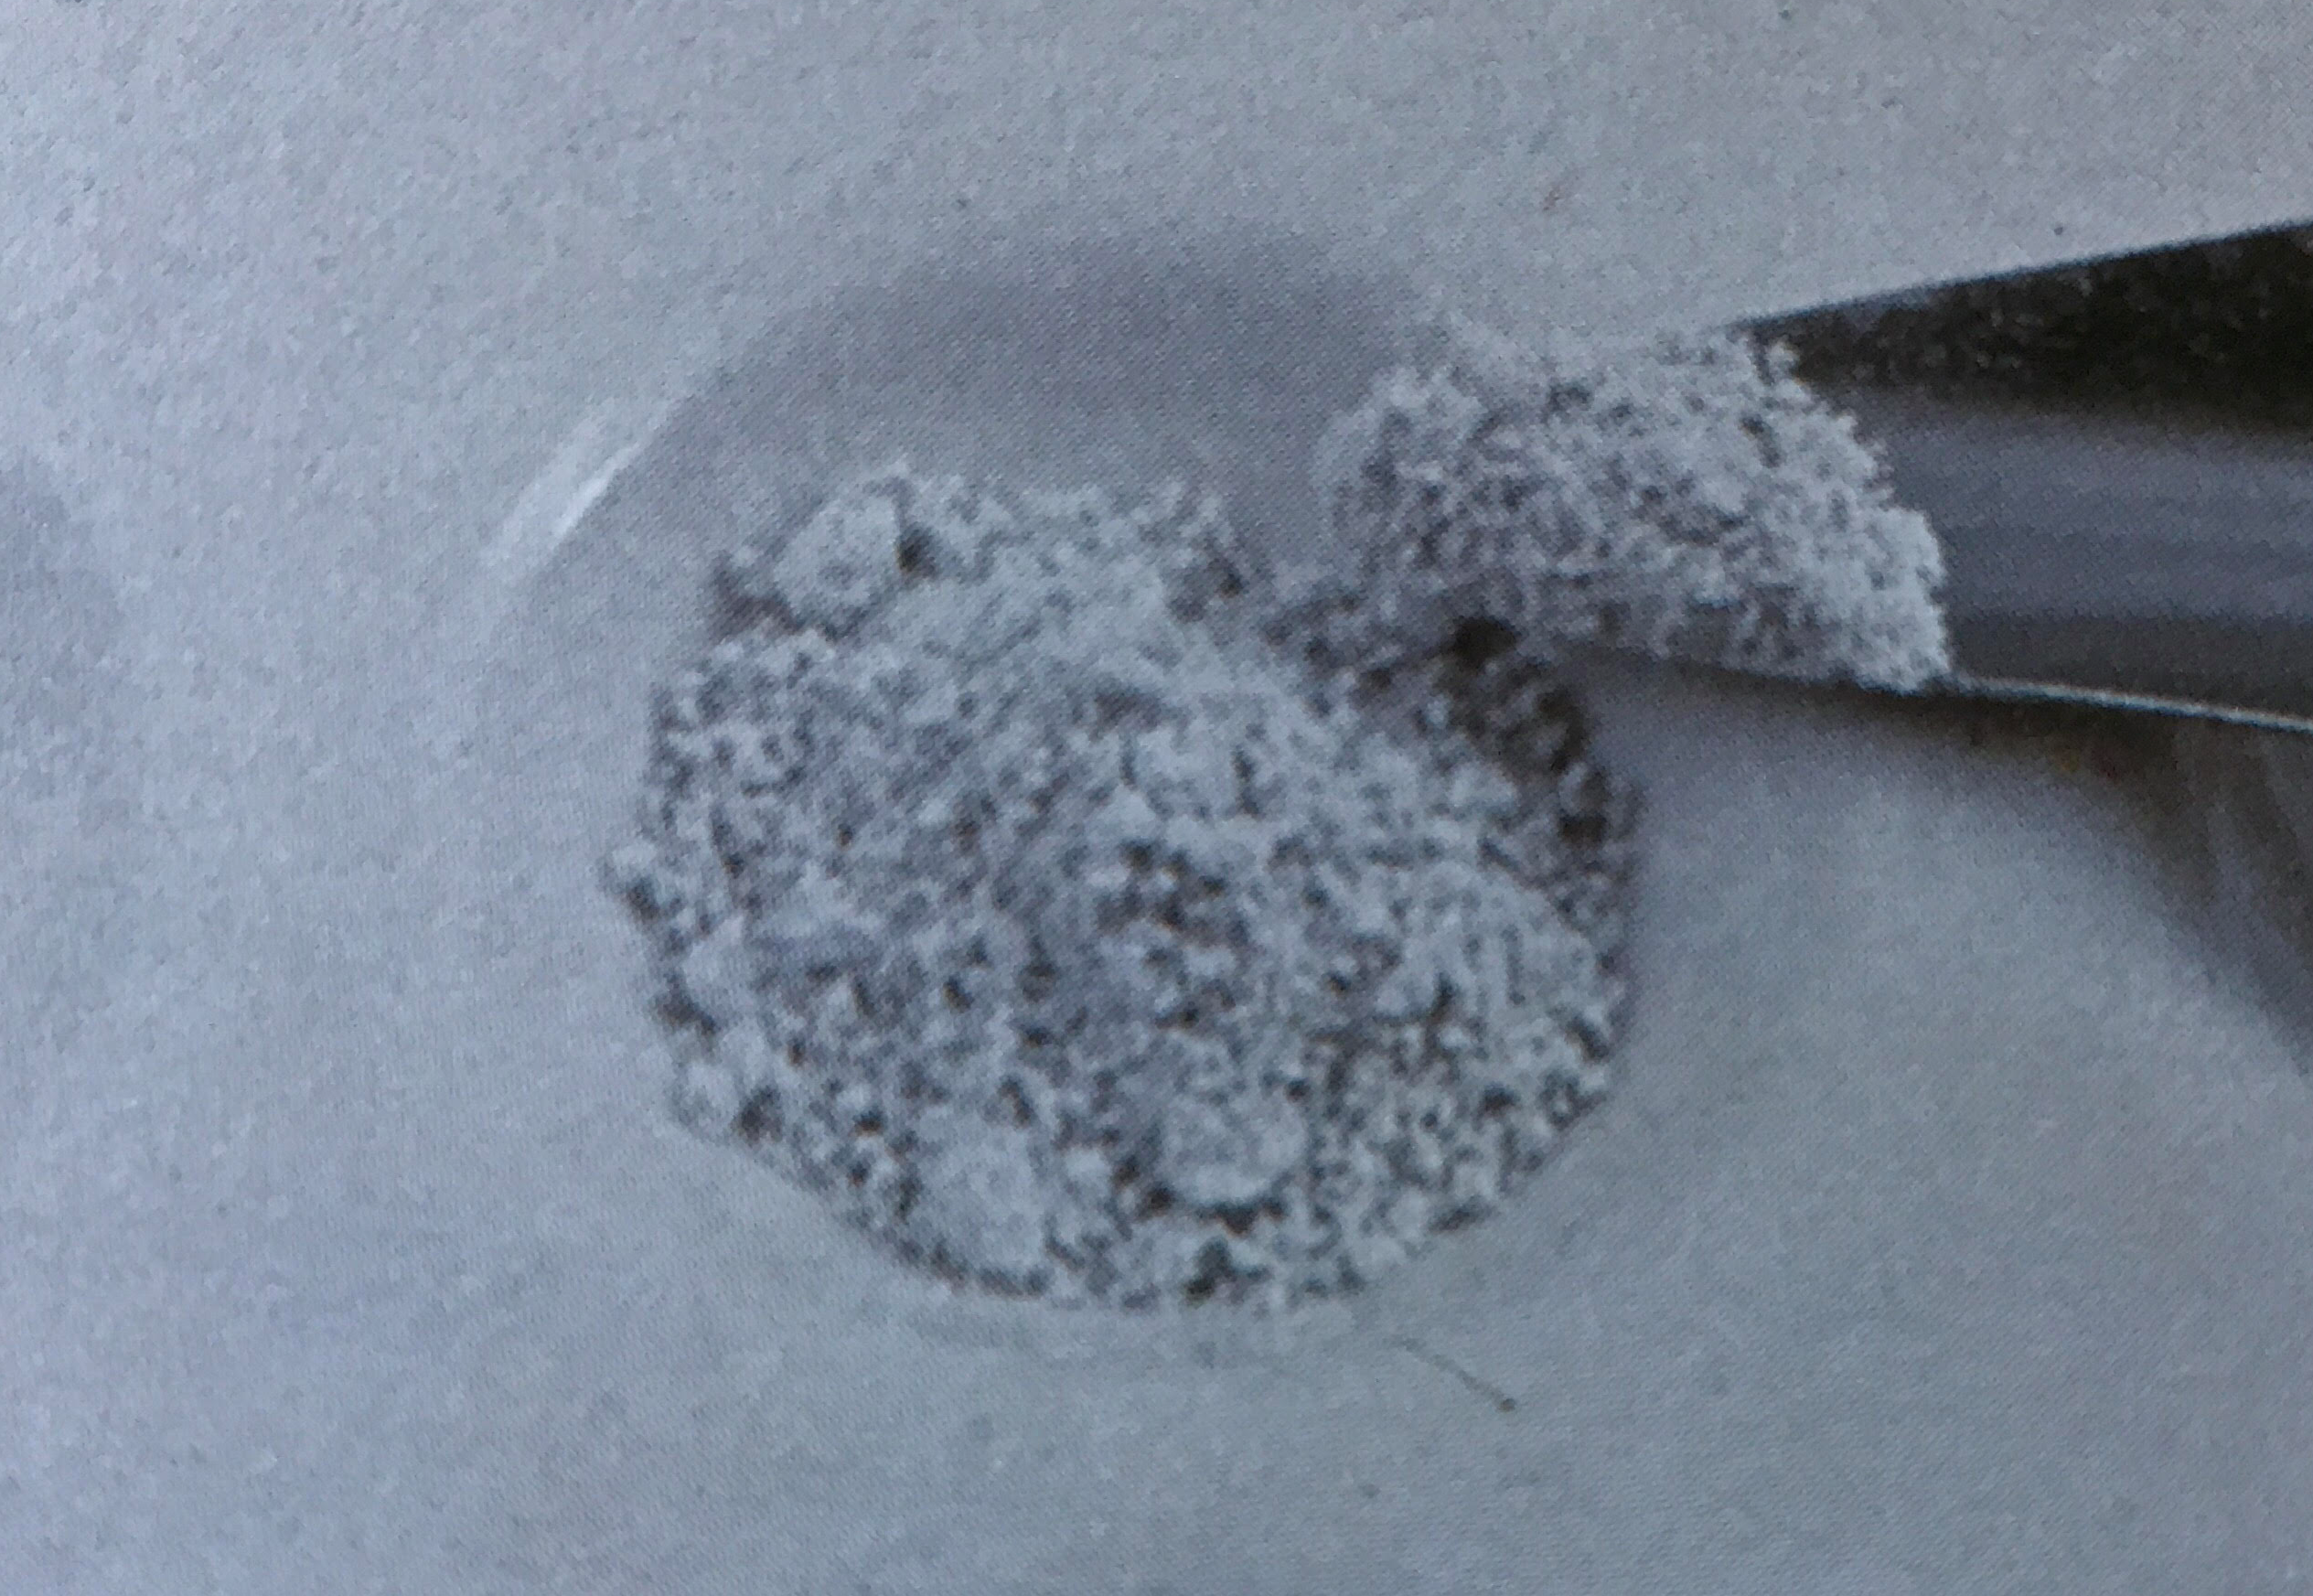 White powder placed in a depression. 